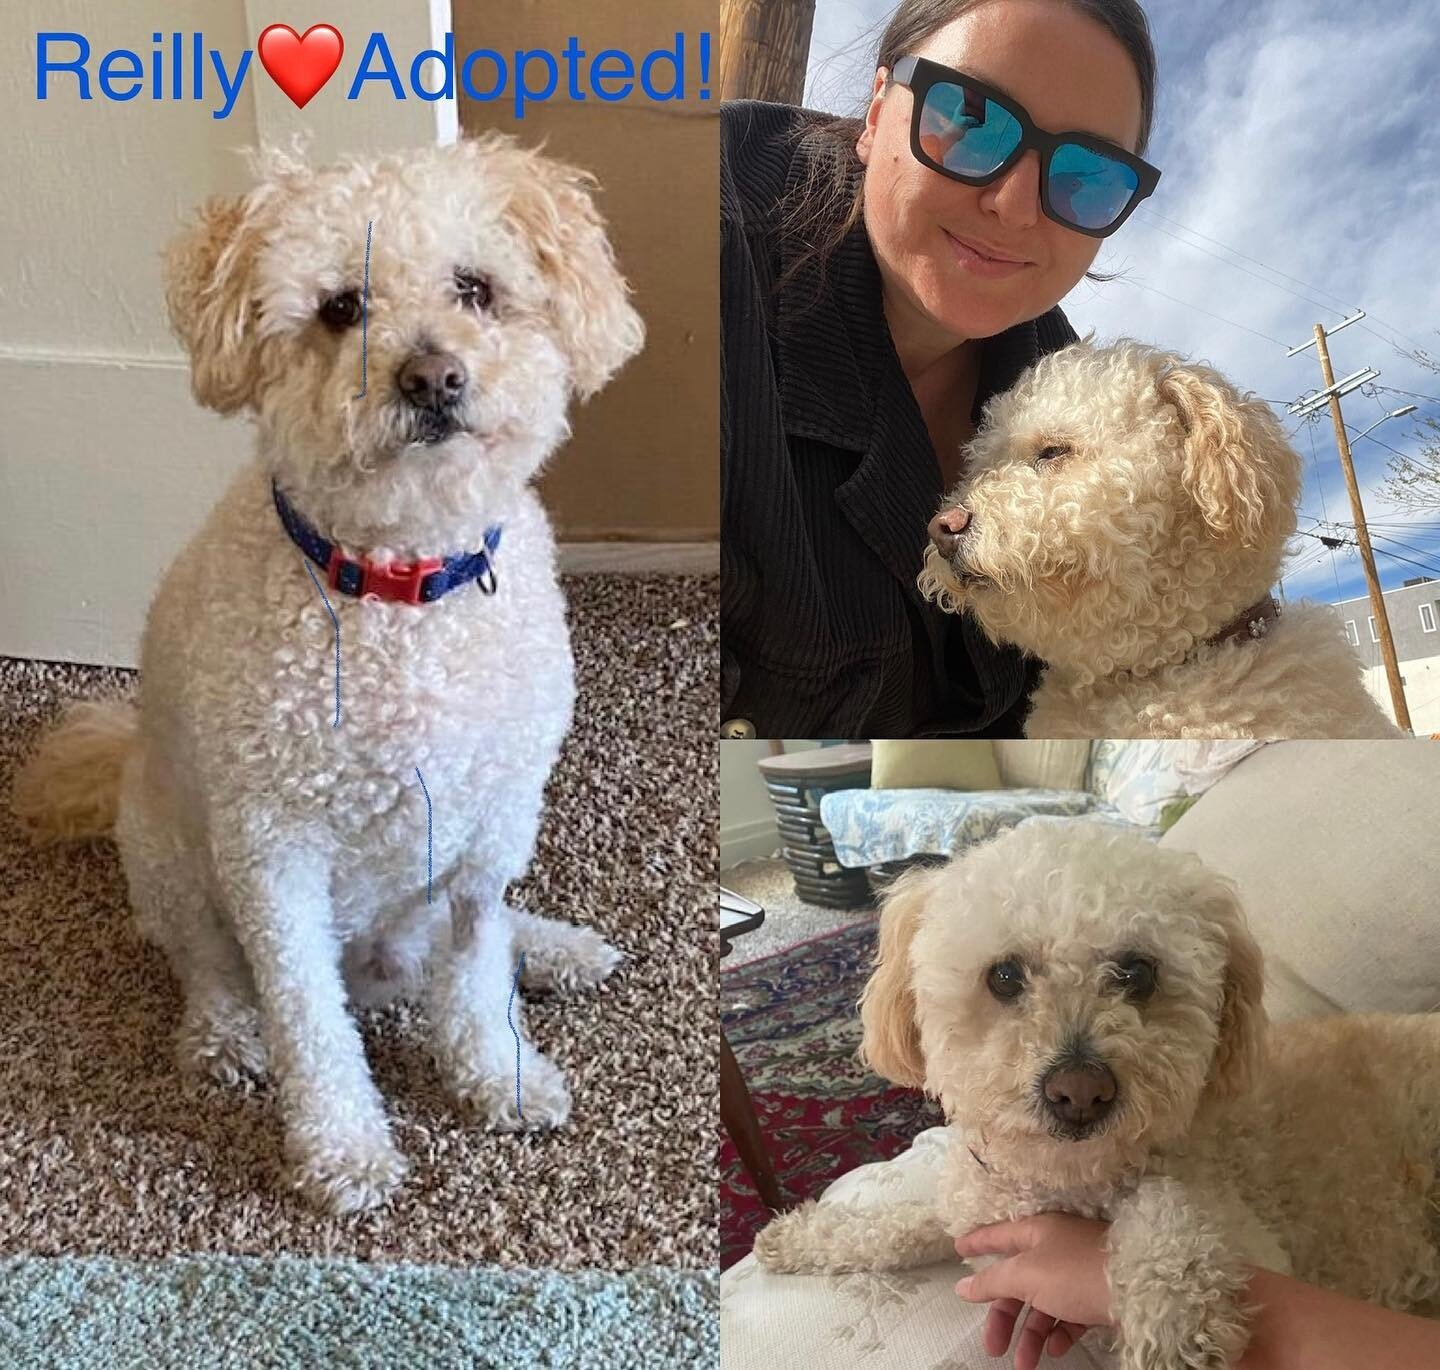 Remember cutie pie REILLY?  He was fostered by Casey Kolodin while he had much needed medical care  and Casey adopted him.  He&rsquo;s now living&mdash;you guessed it&mdash;the life of Reilly&mdash;with Casey!  Thank you Casey, for giving Reilly all 